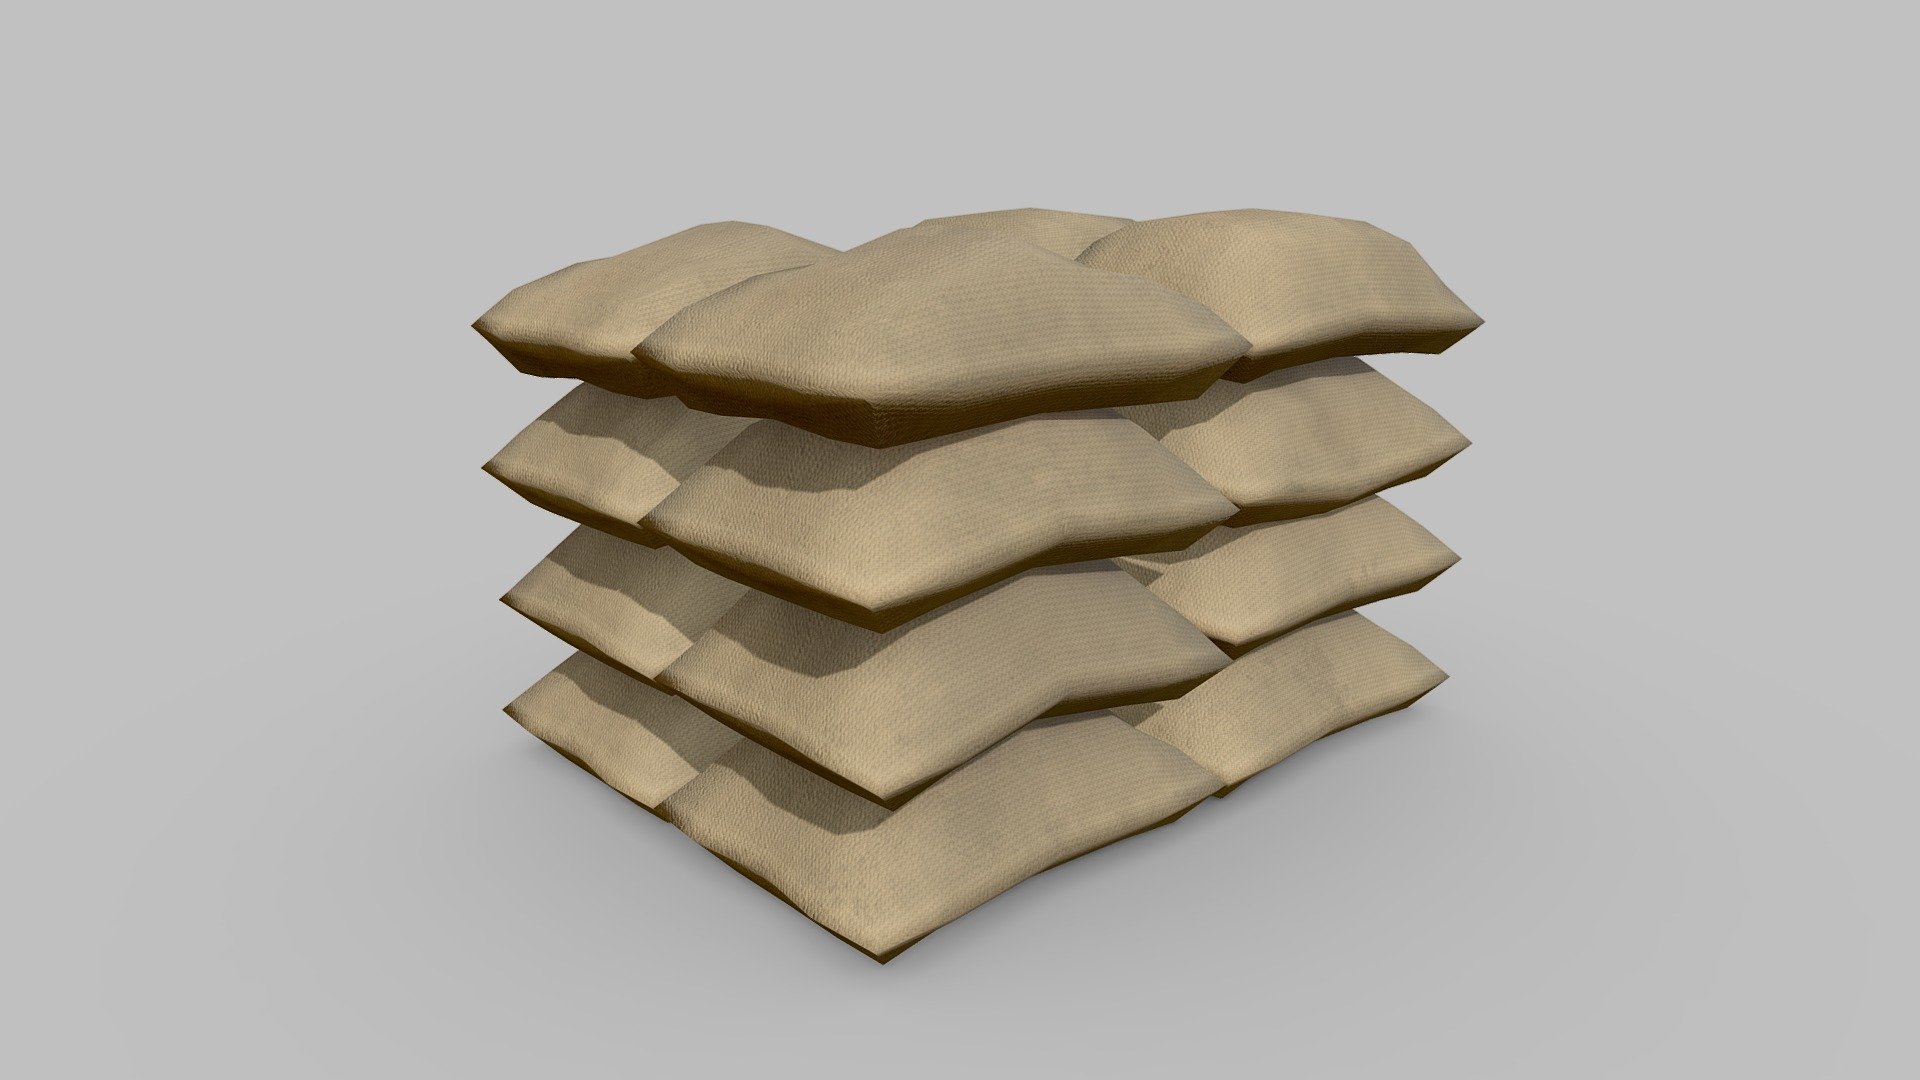 Low Poly Burlap Sack for your renders and games

Textures:

Diffuse color, Roughness, Height

All textures are 2K

Files Formats:

Blend

Fbx

Obj - Burlap Sack - Buy Royalty Free 3D model by Vanessa Araújo (@vanessa3d) 3d model